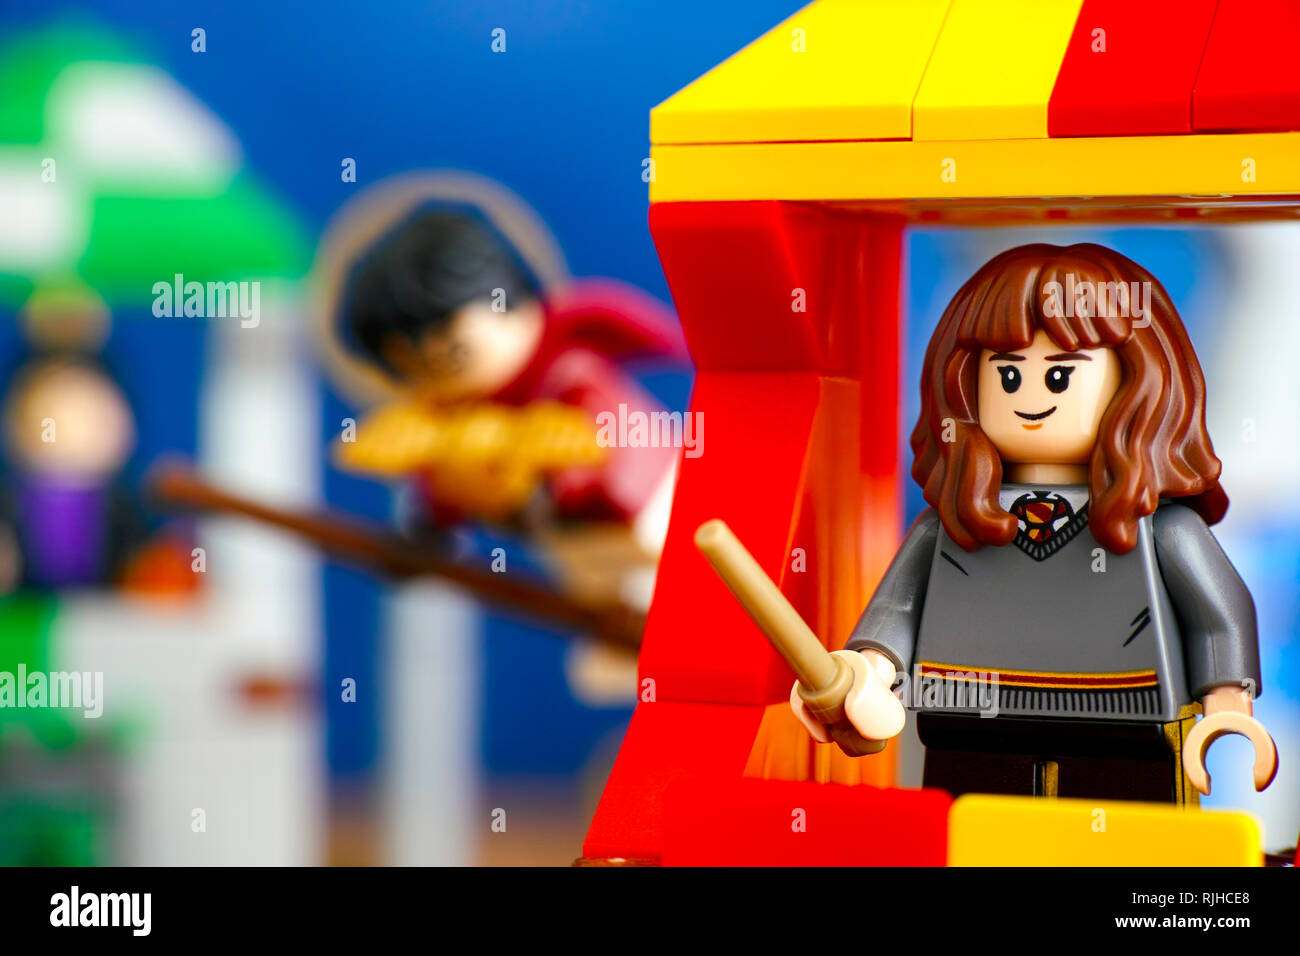 Tambov, Russian Federation - January 20, 2019 Quidditch Match Lego Harry Potter play set. Hermione Granger minifigure on Gryffindor house tower. Stock Photo